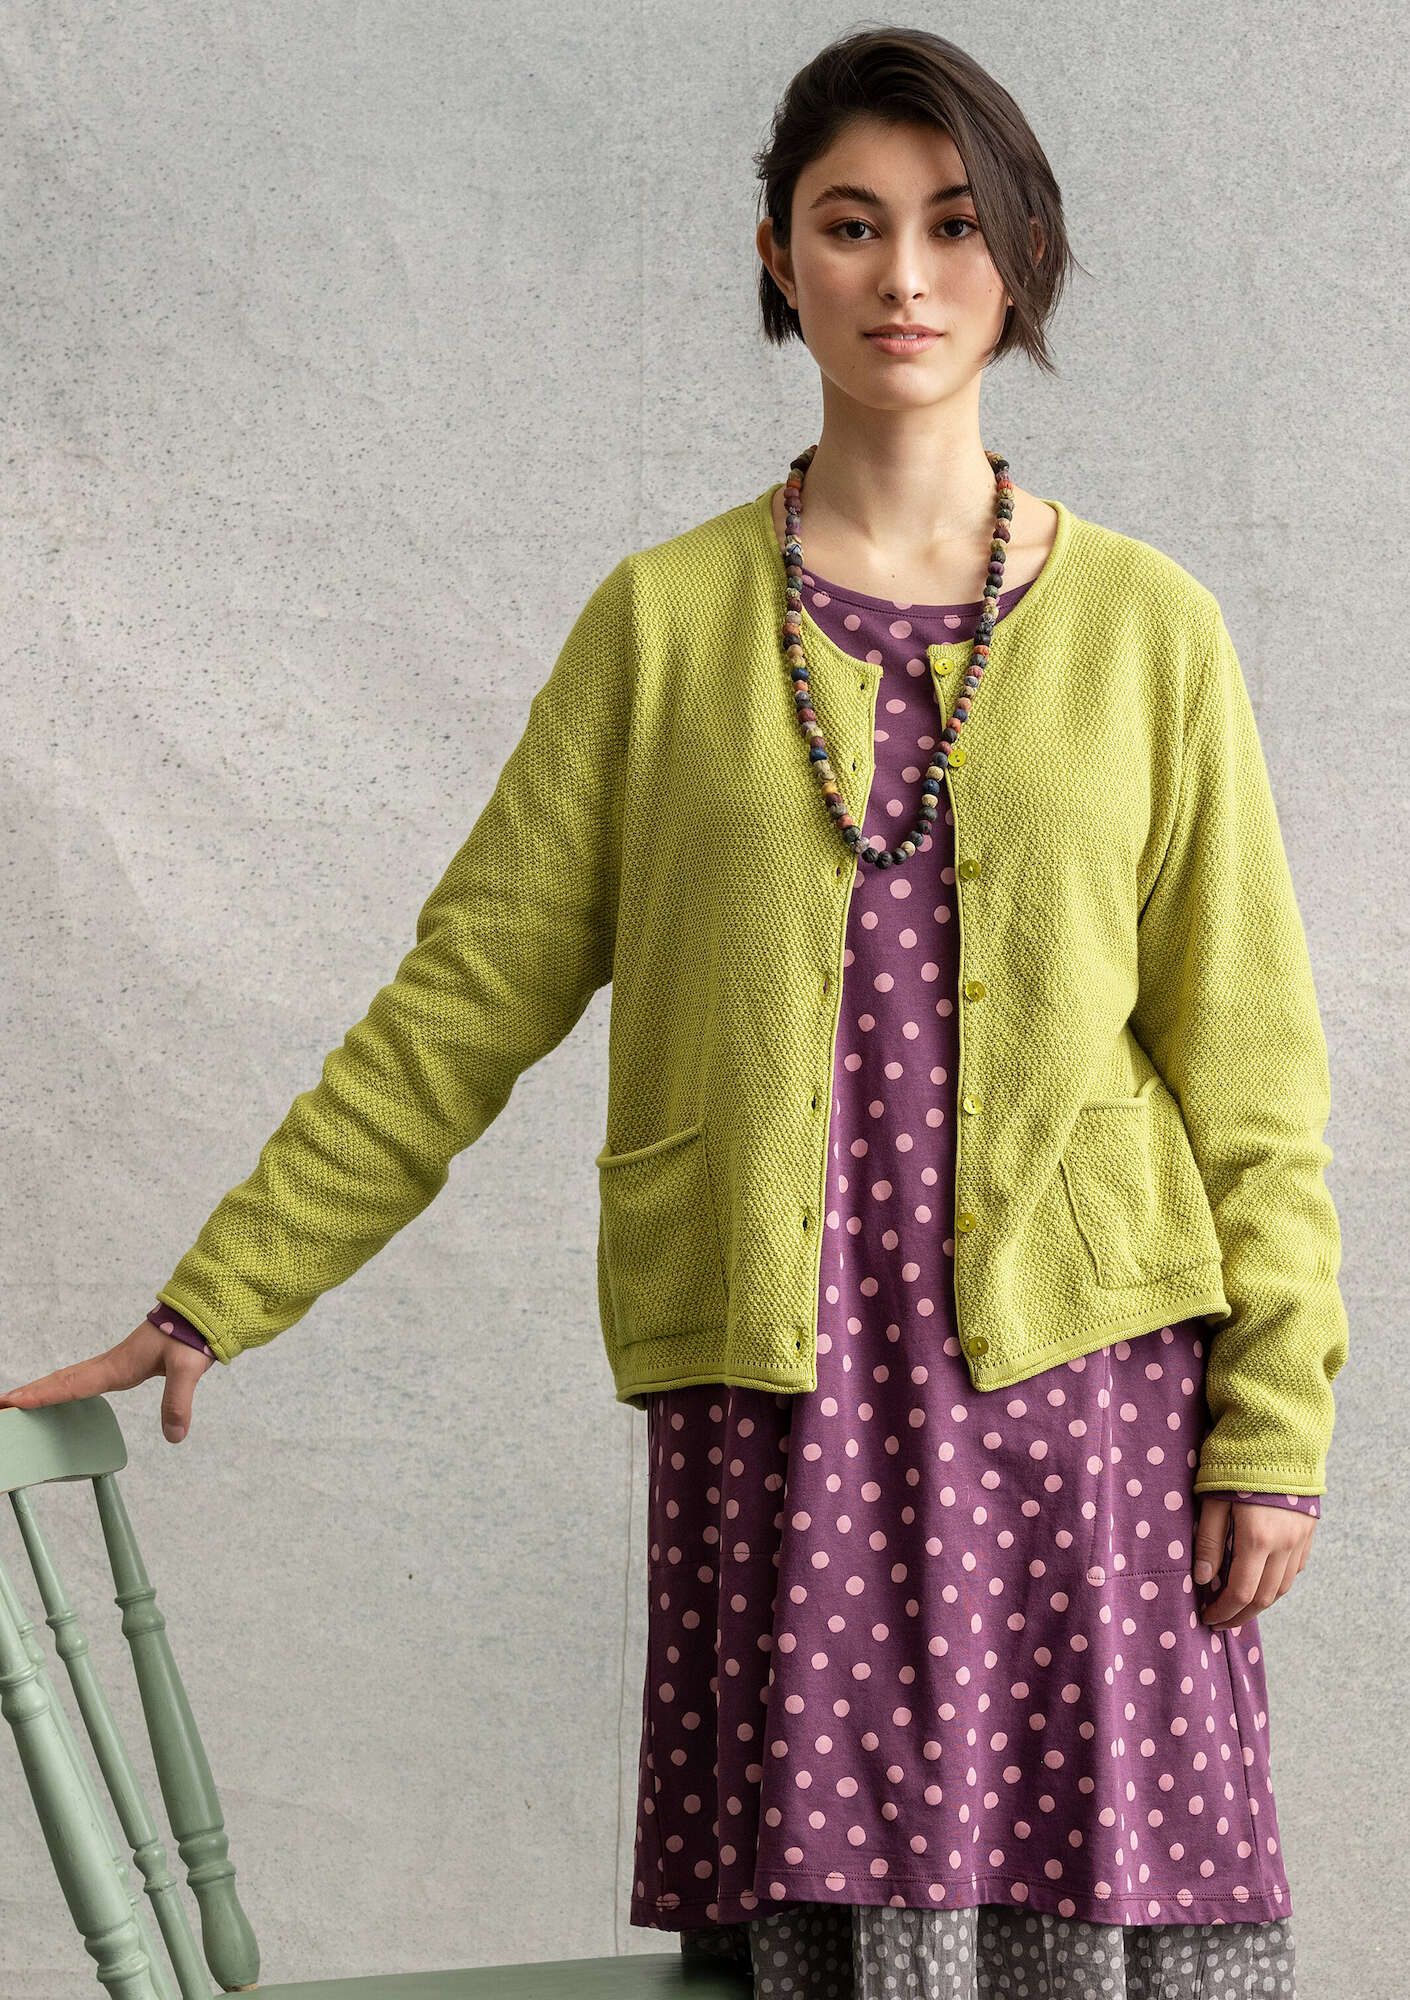 Moss-stitch cardigan in recycled cotton guava